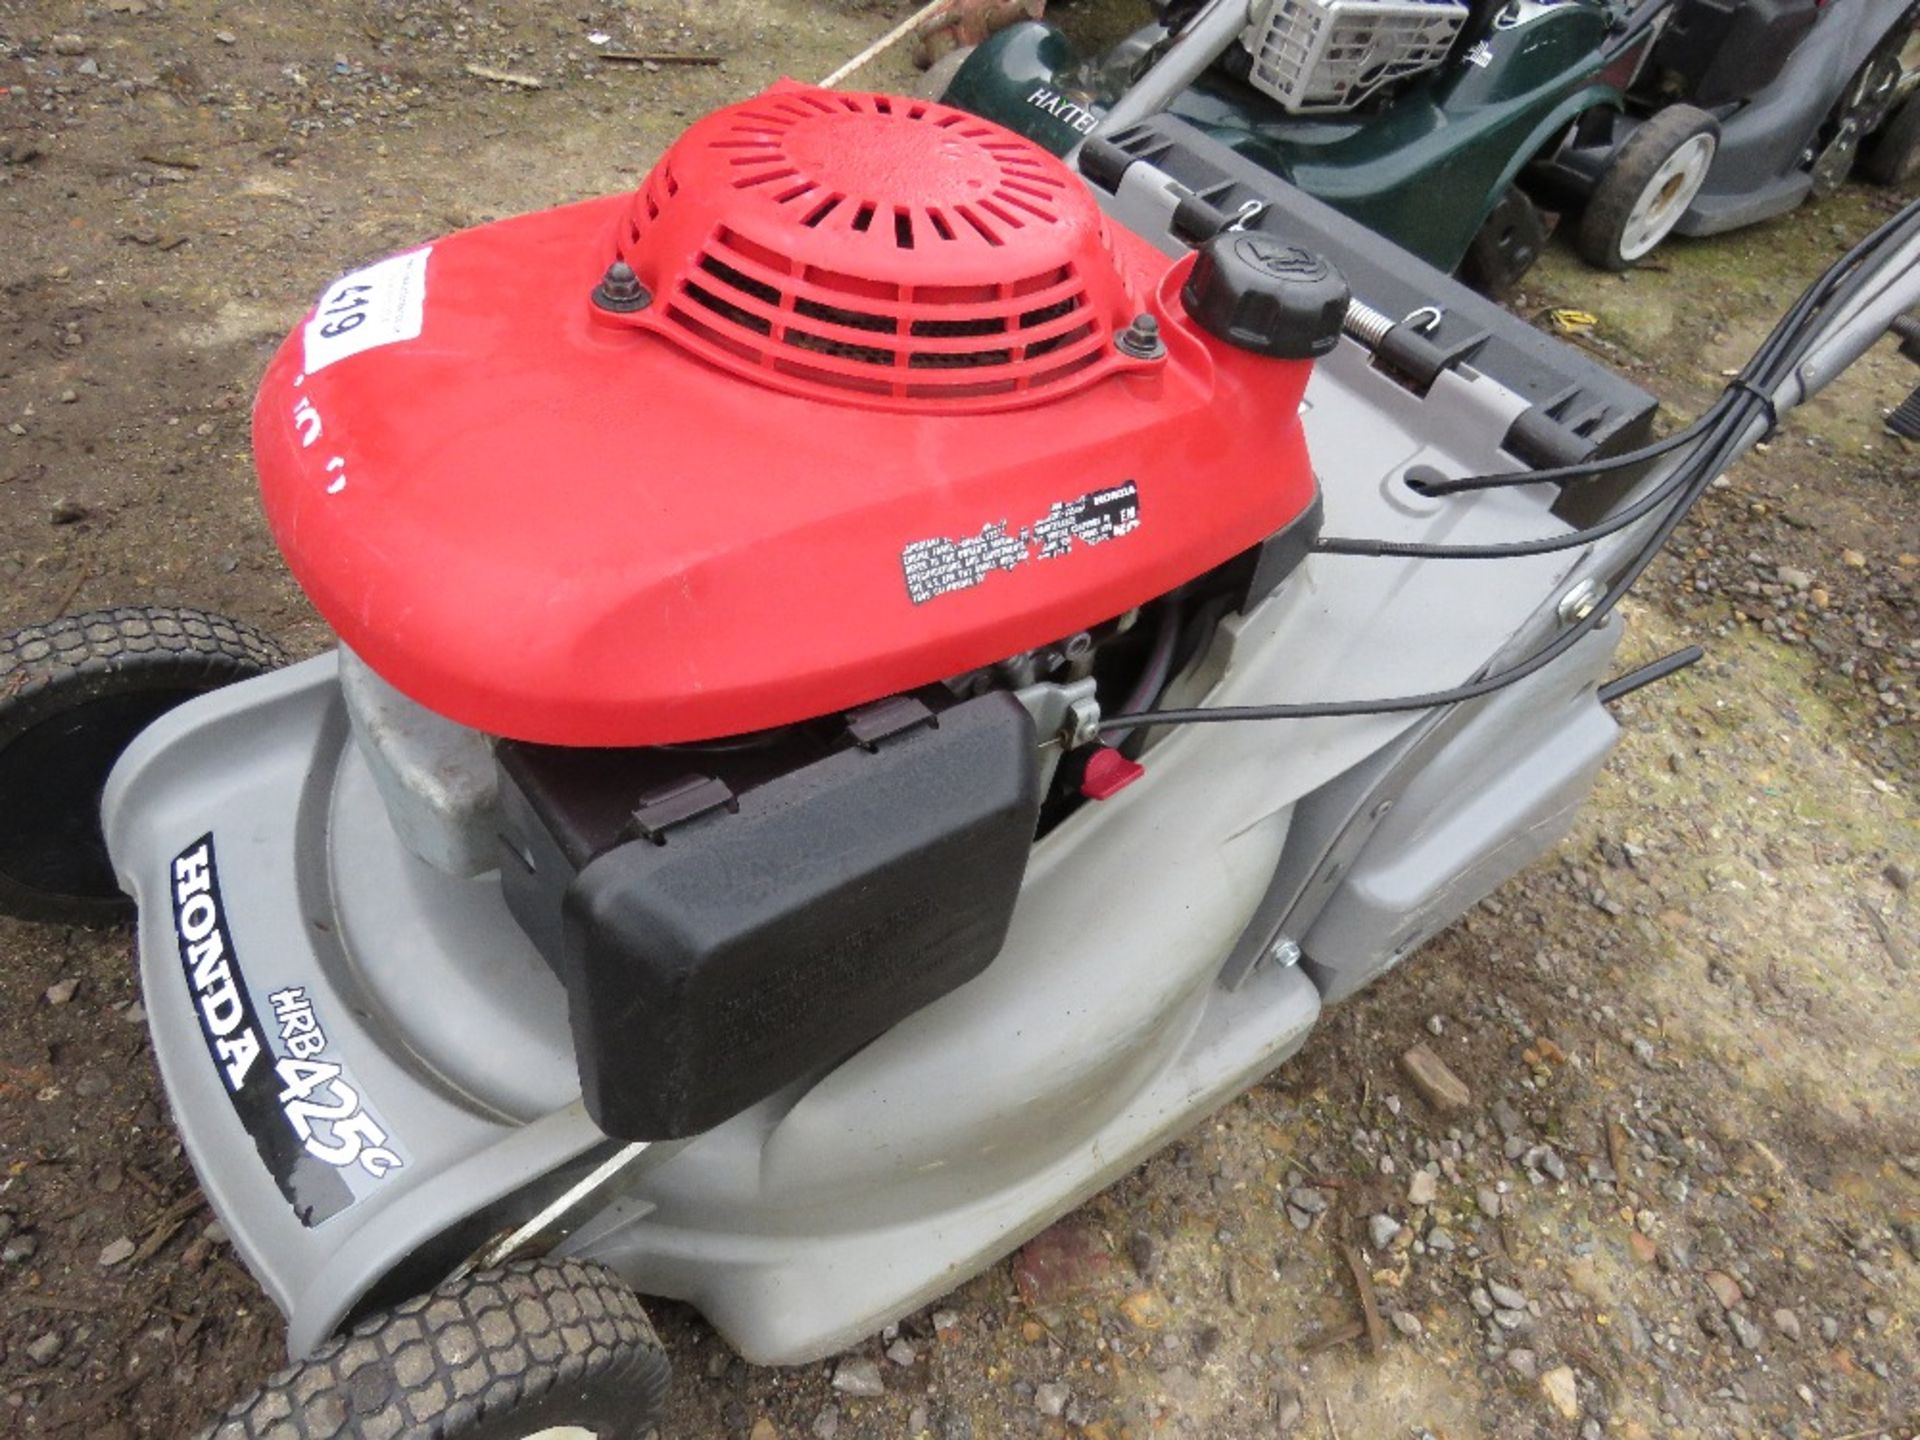 HONDA HRB425 PETROL ENGINE ROLLER MOWER, NO COLLECTOR.....THIS LOT IS SOLD UNDER THE AUCTIONEERS MAR